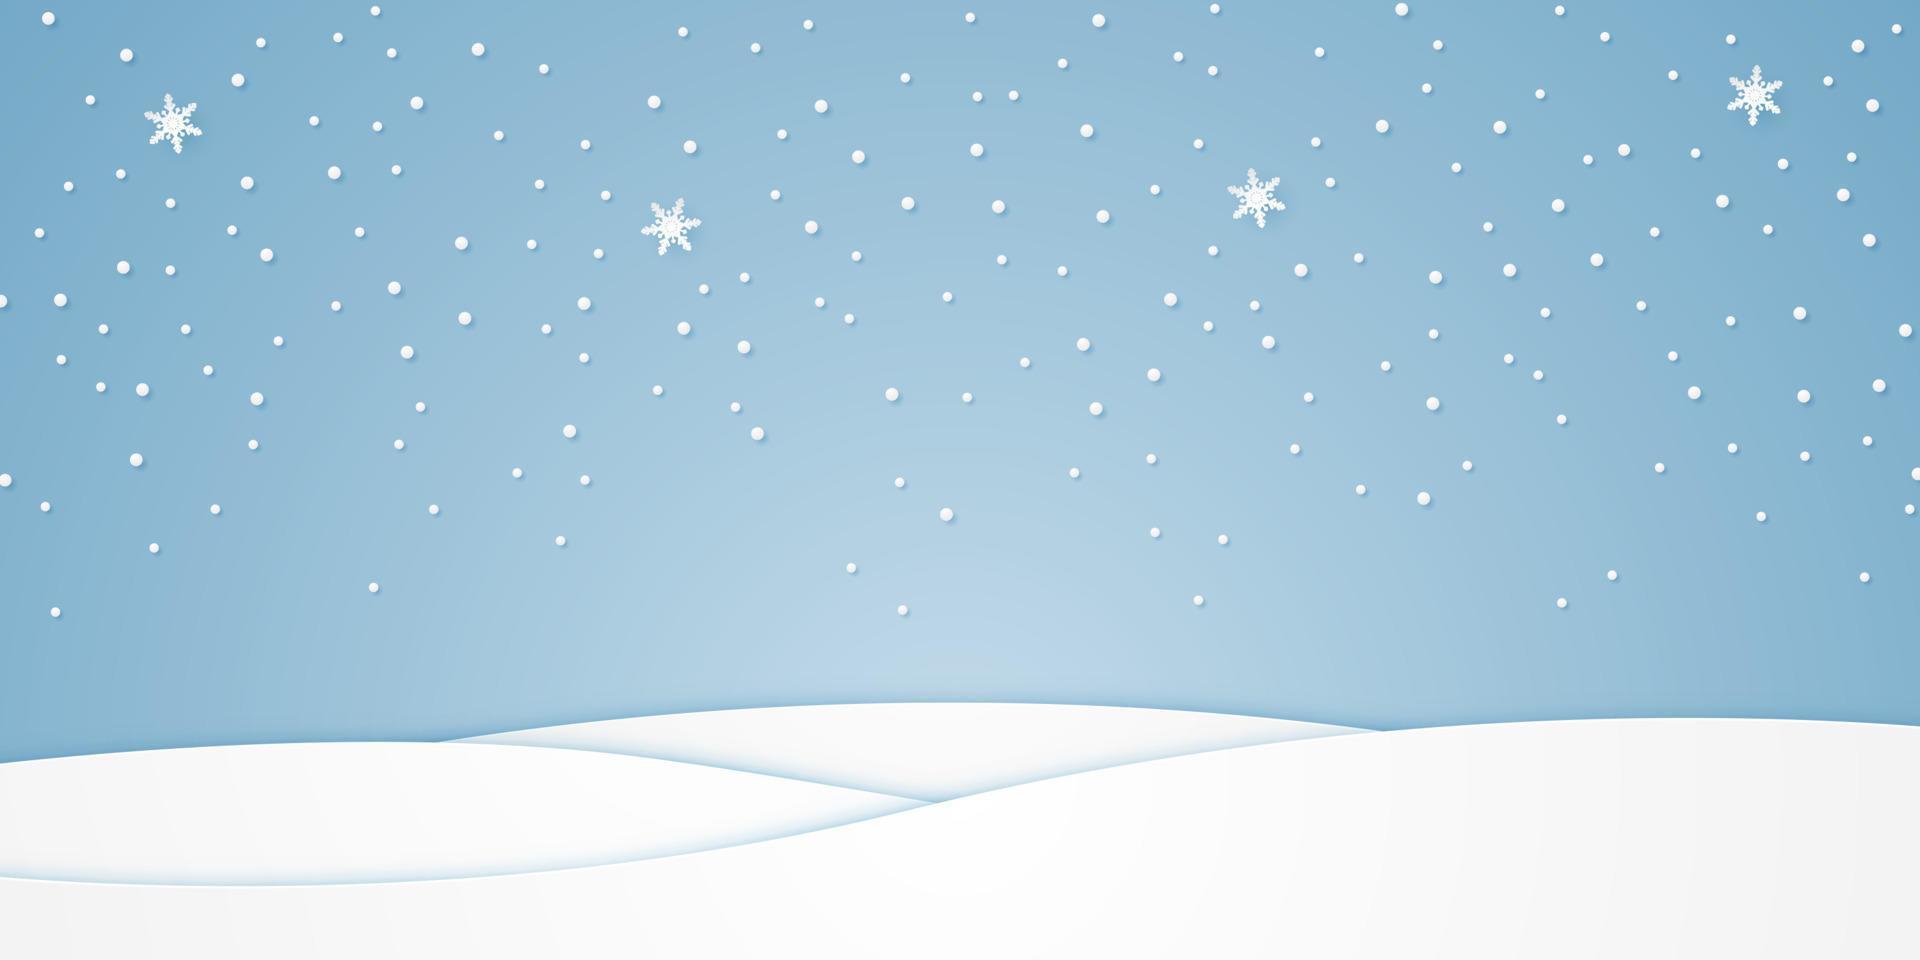 landscape and snow falling in winter season, white hill, paper art style vector